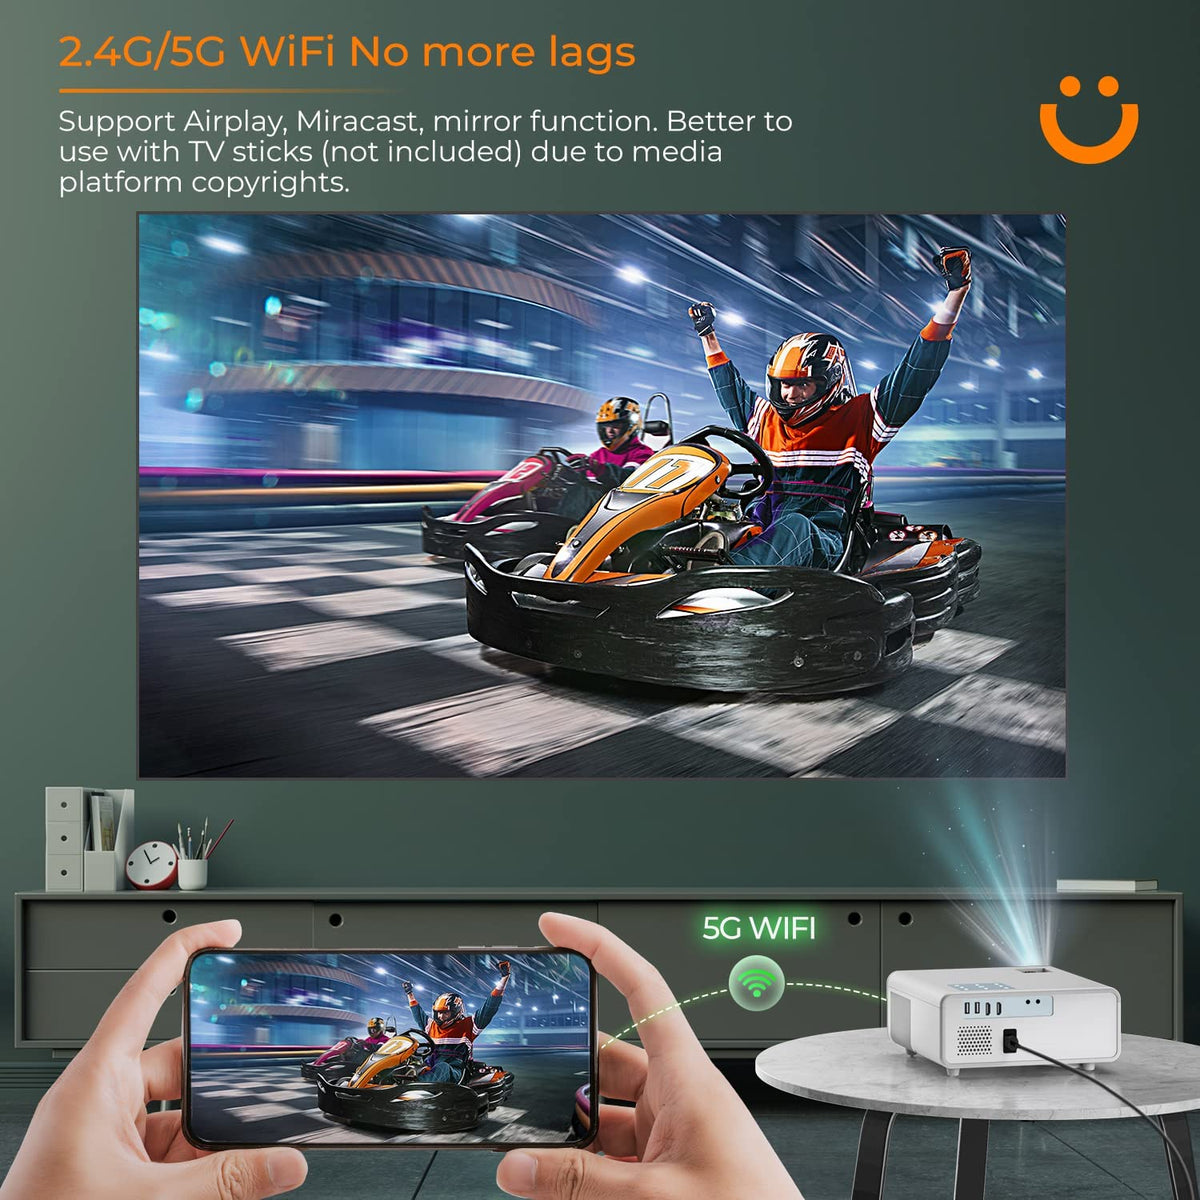 Adopting advanced 5G WiFi, the transmission speed is three times faster than projectors with 2.4G WiFi in the market. Say goodbye to transmission latency,